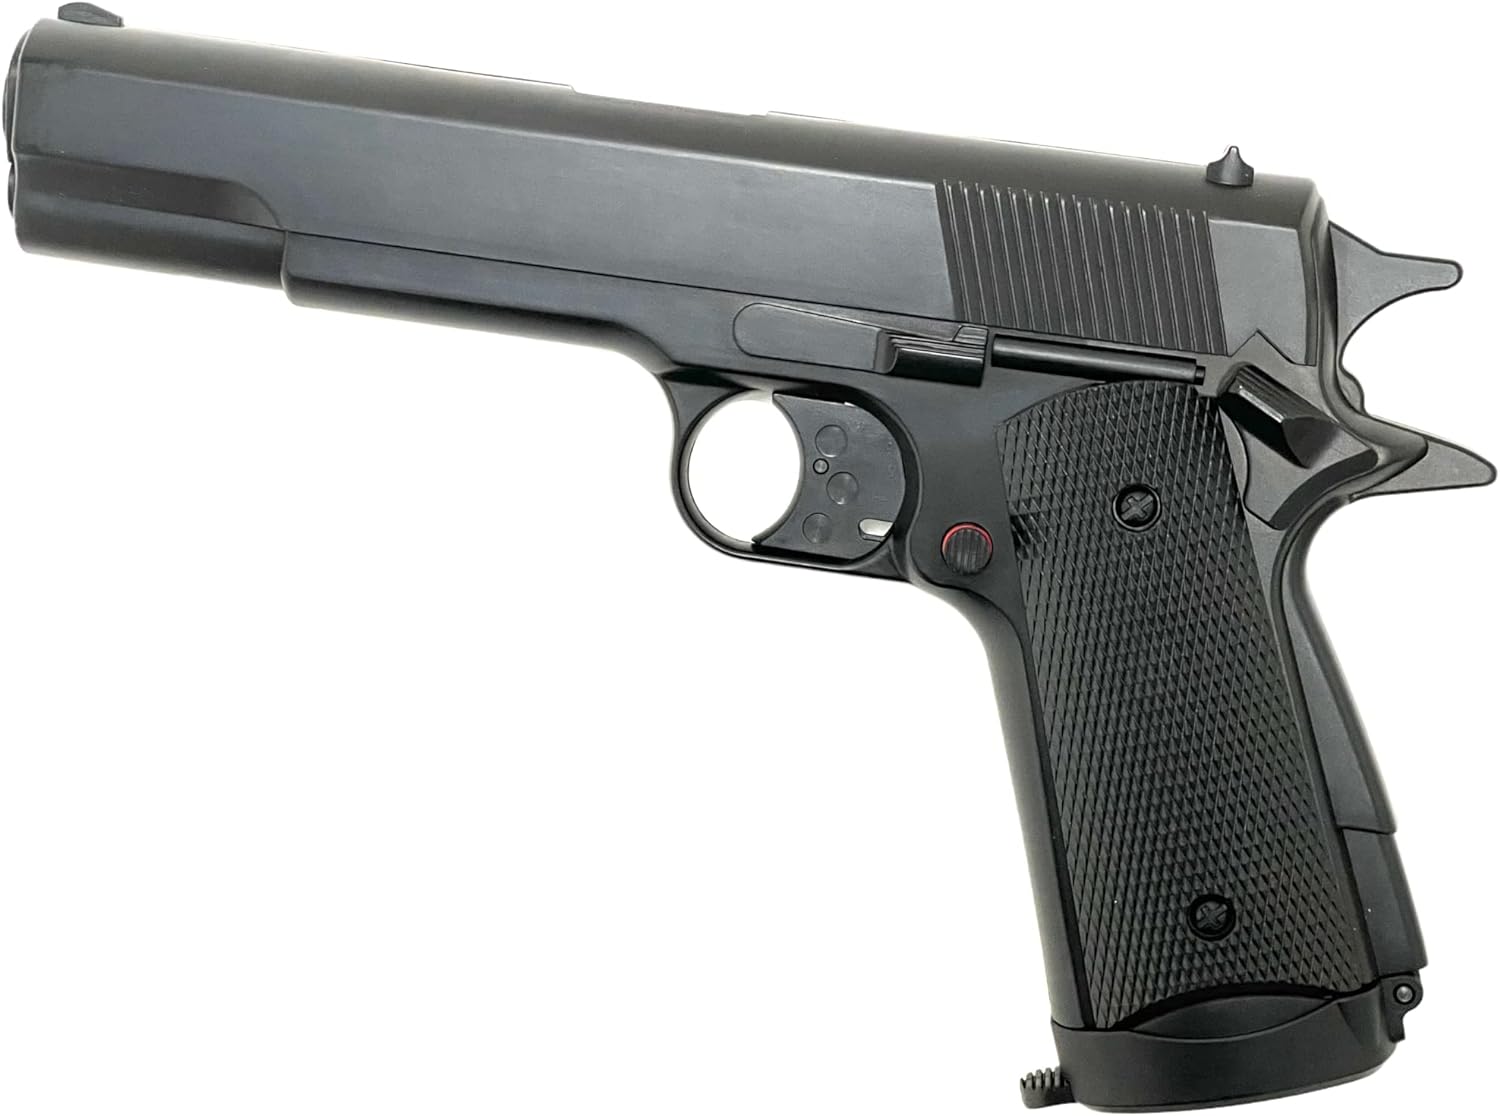 Airsportinggoods HFC 1911 CO2 POWERED .177 CAL BB NON-BLOWBACK AIR PISTOL